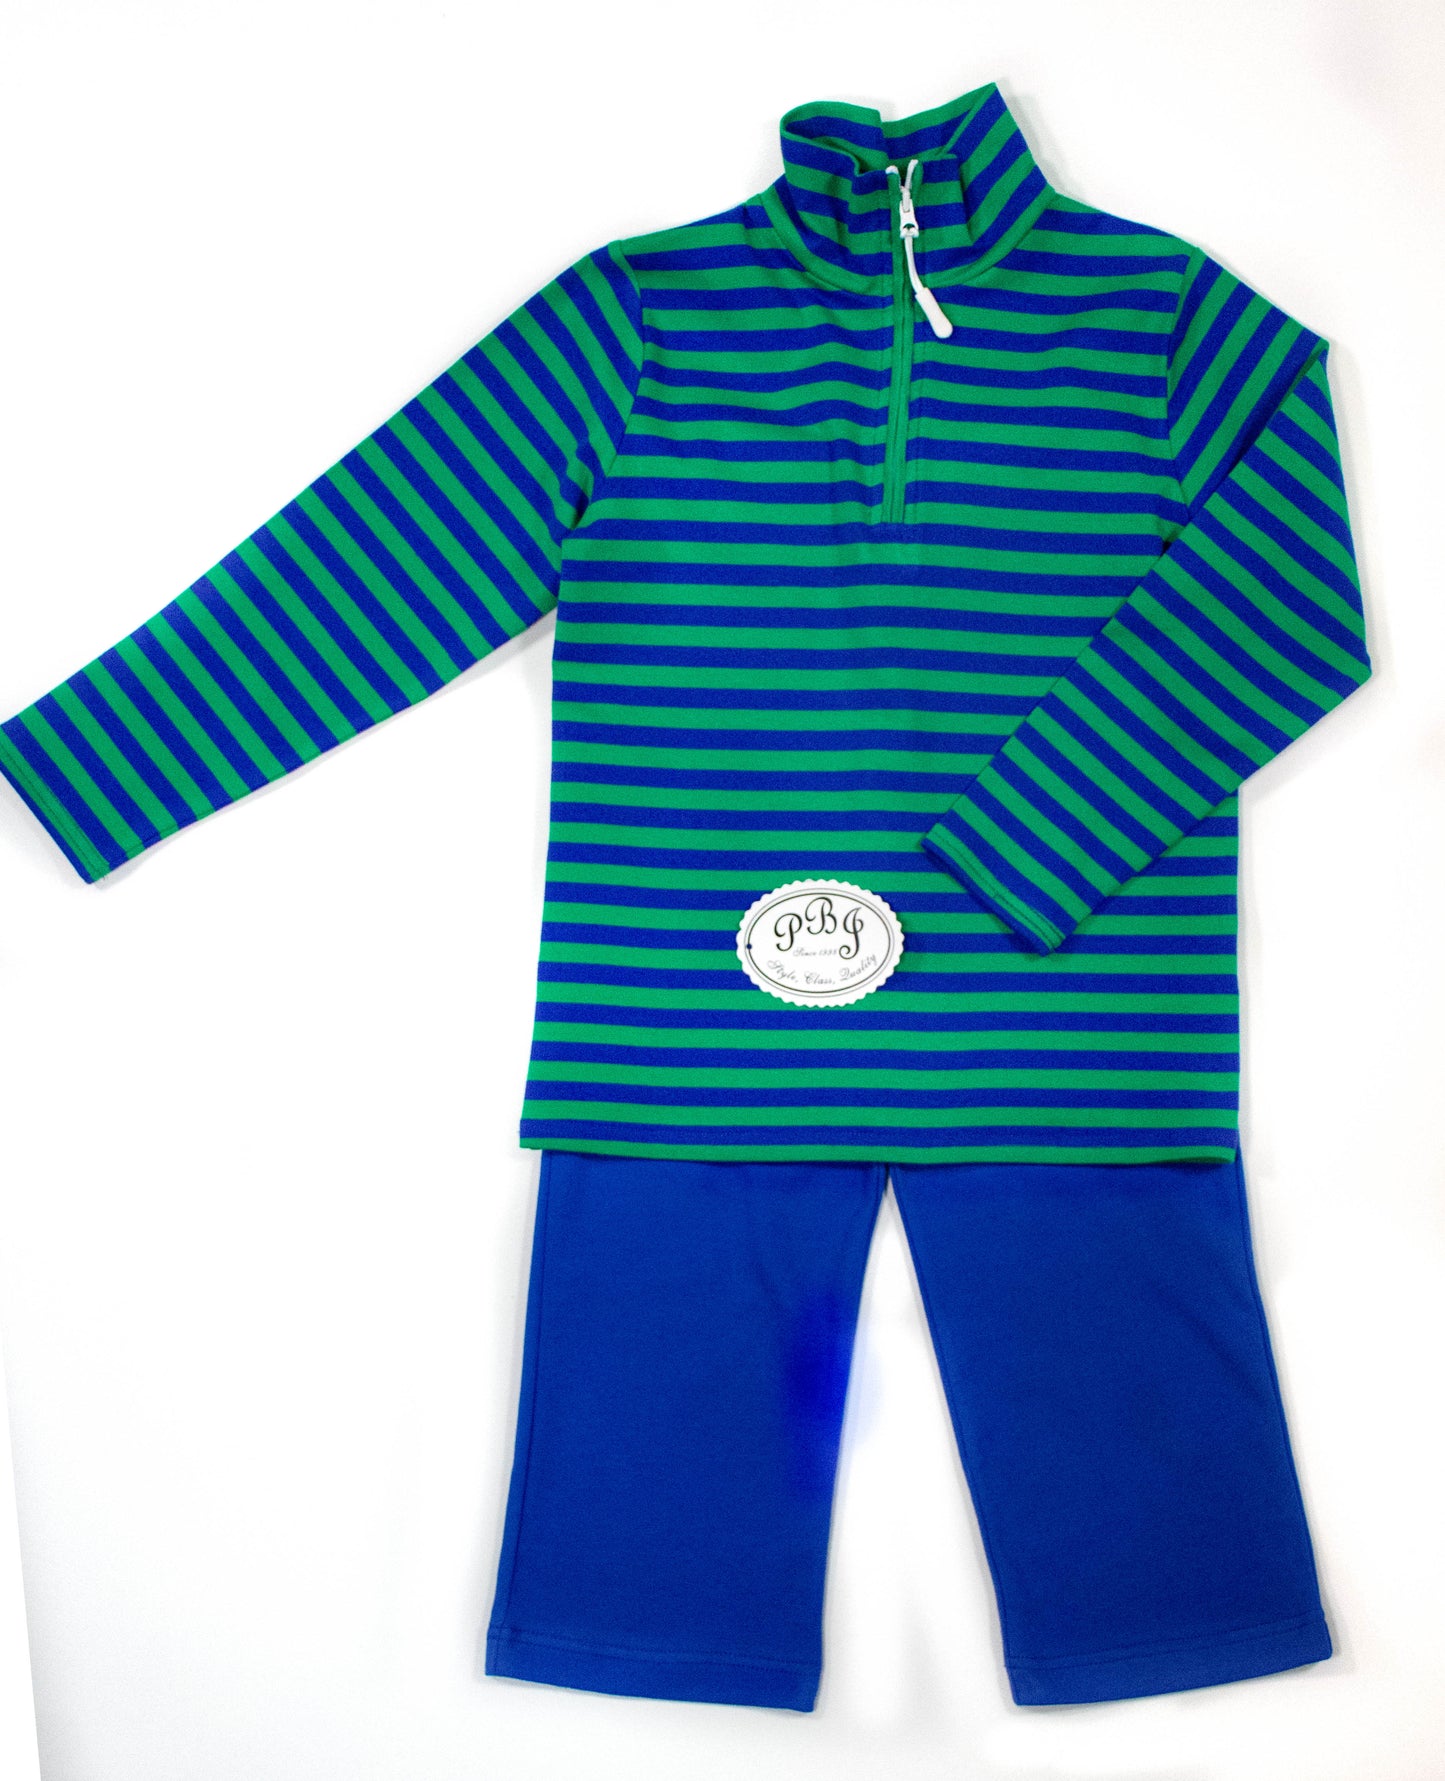 Royal/Emerald 1/4 zipped pullover*